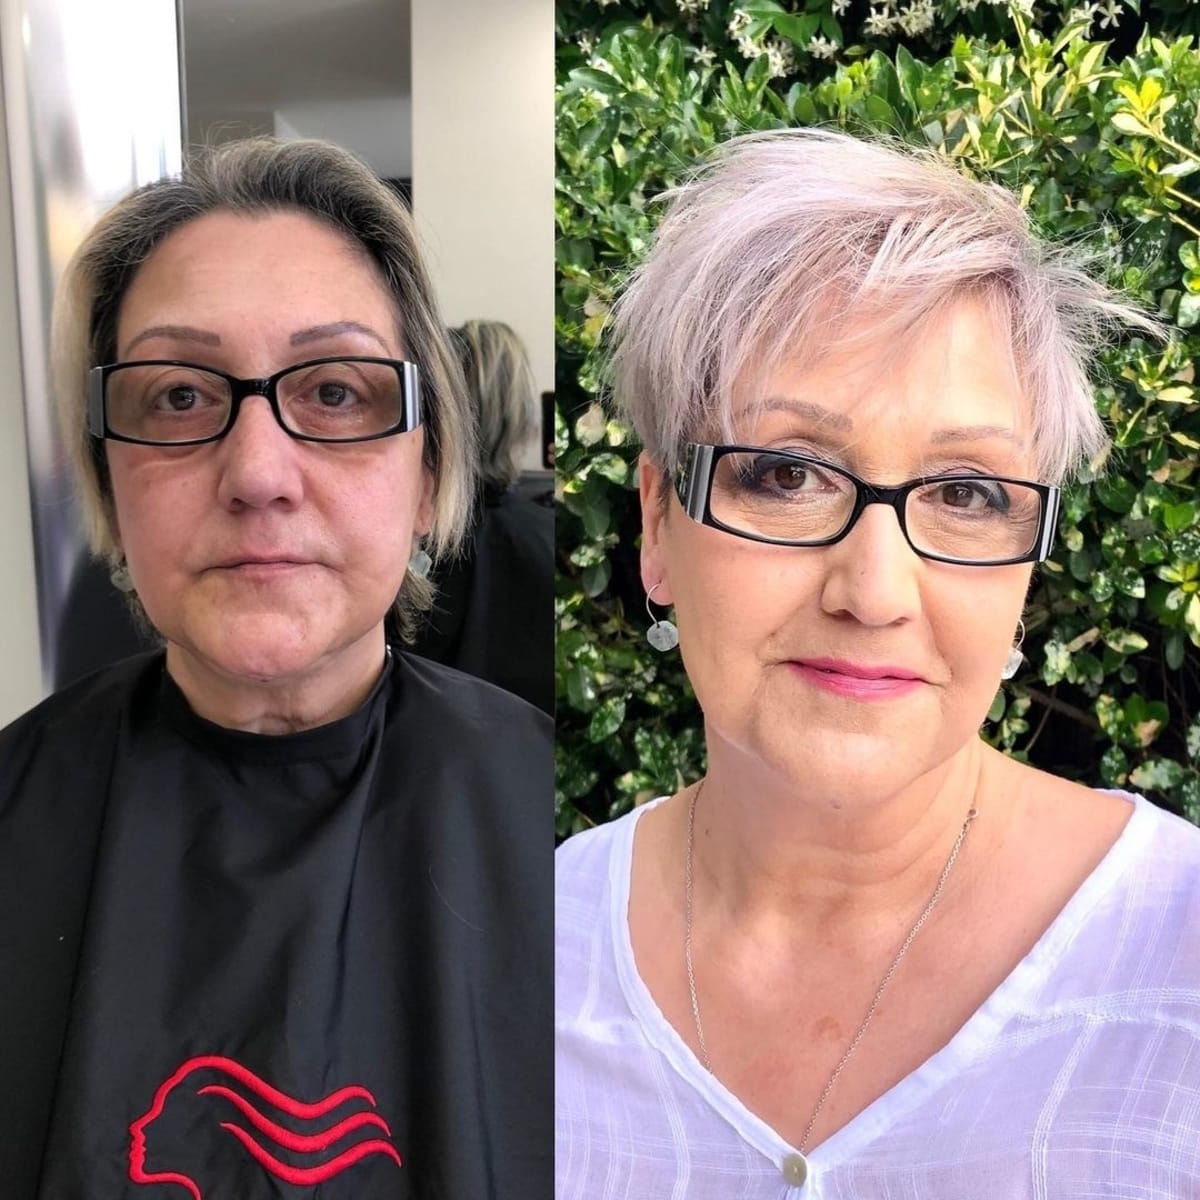 25 Asymmetrical Haircuts for Women Over 60 with Sassy Personalities